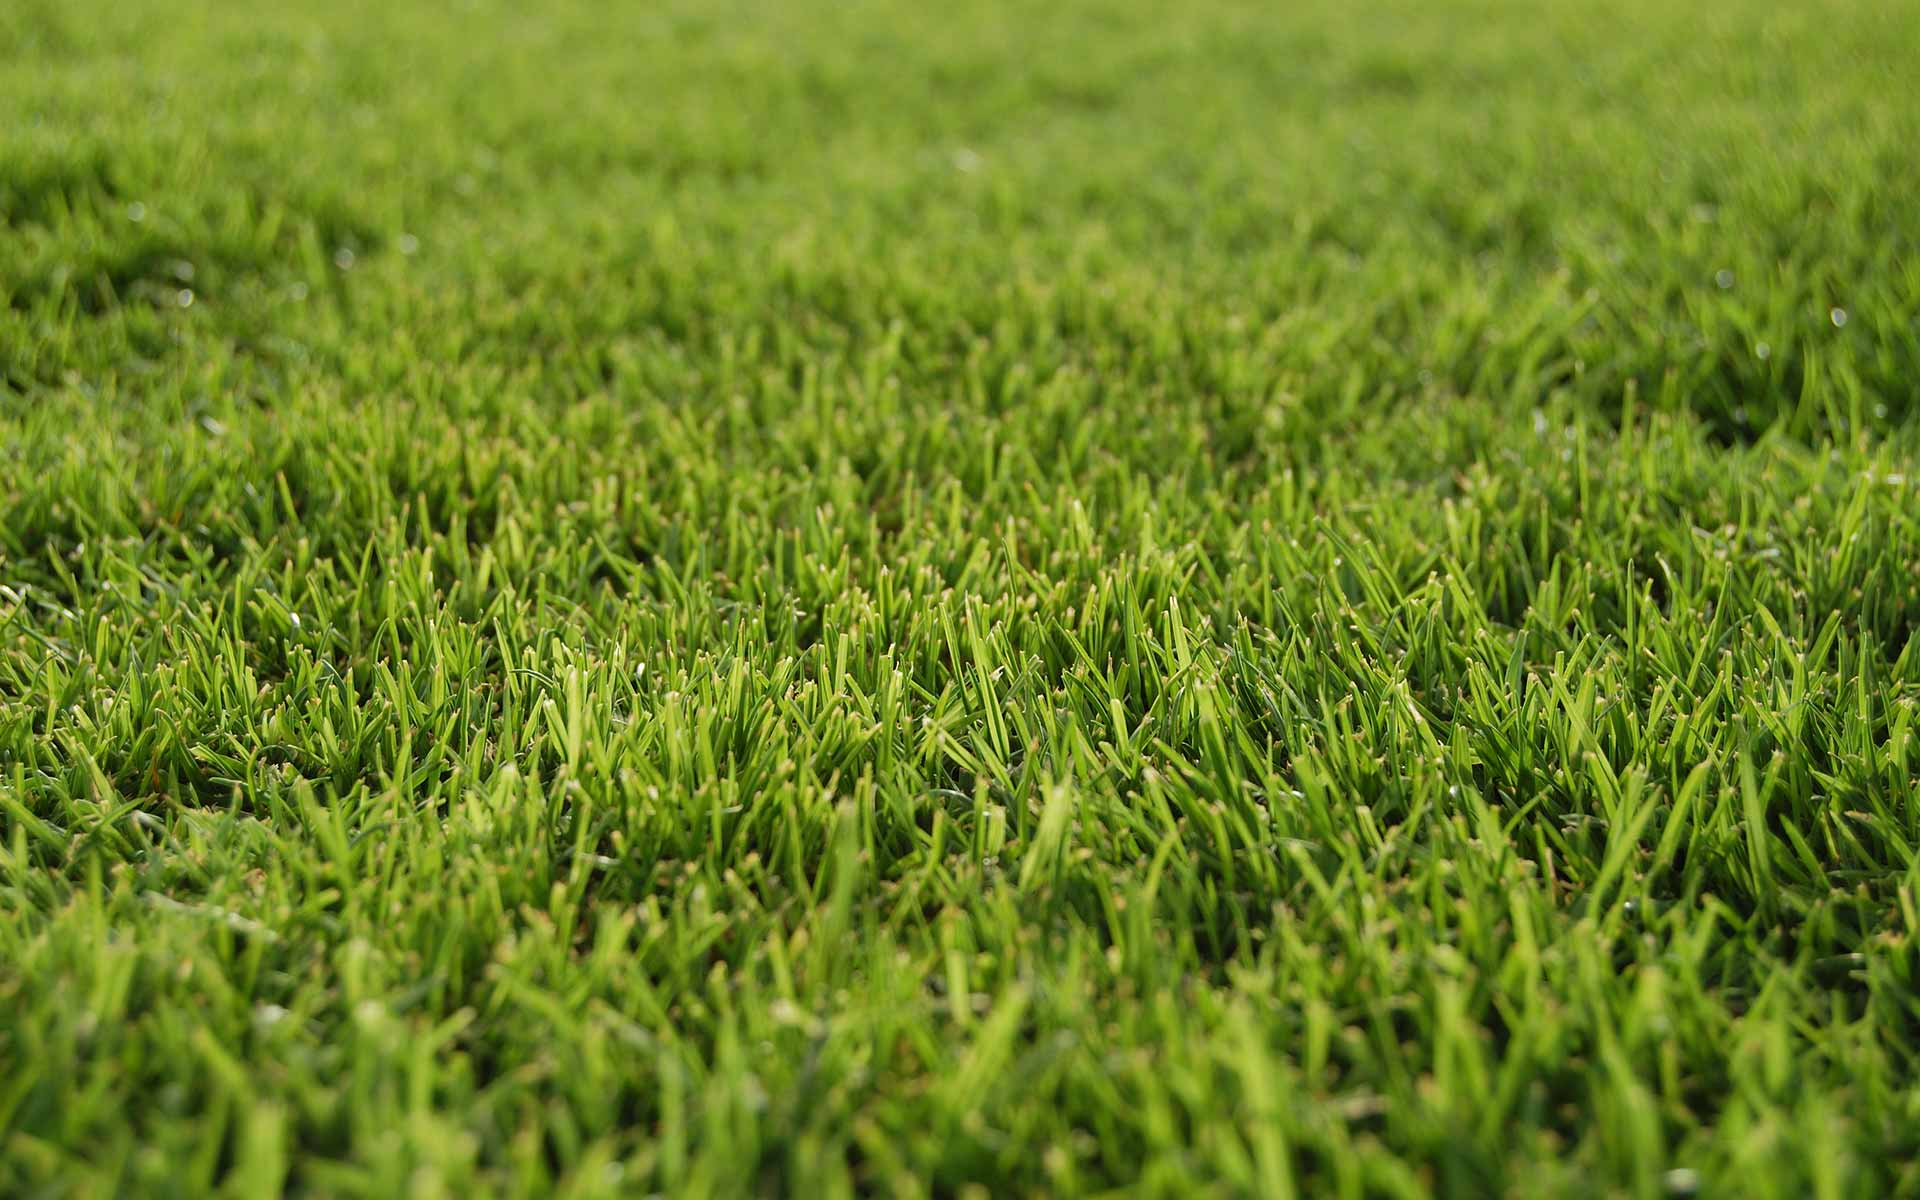 Healthy, green lawn grass at a home in Keller, TX.